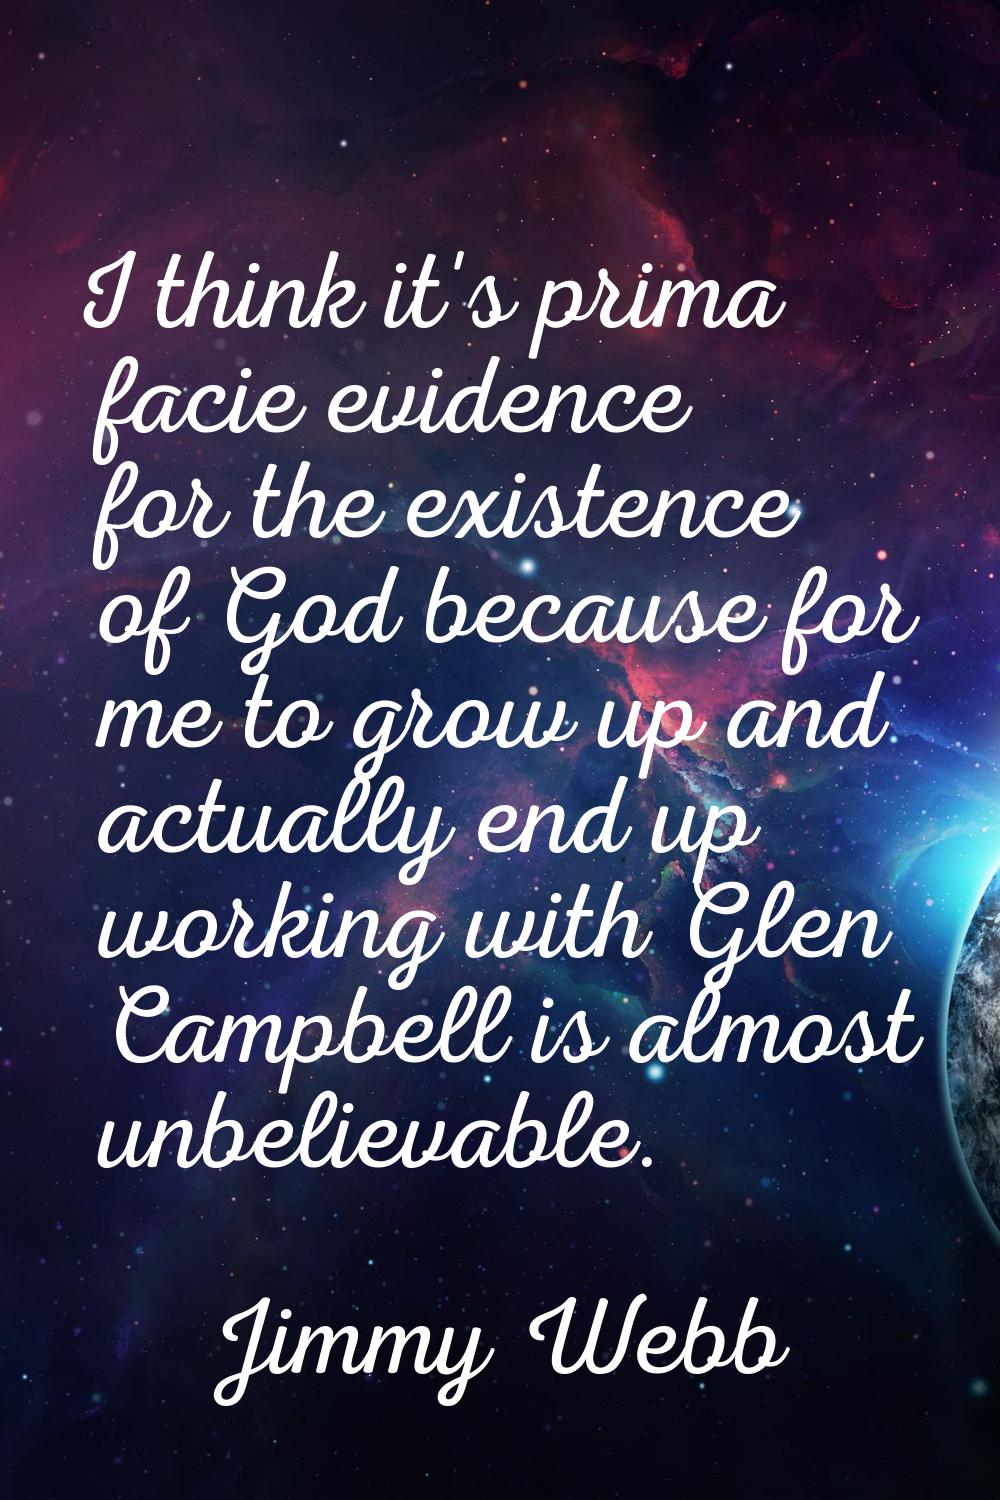 I think it's prima facie evidence for the existence of God because for me to grow up and actually e